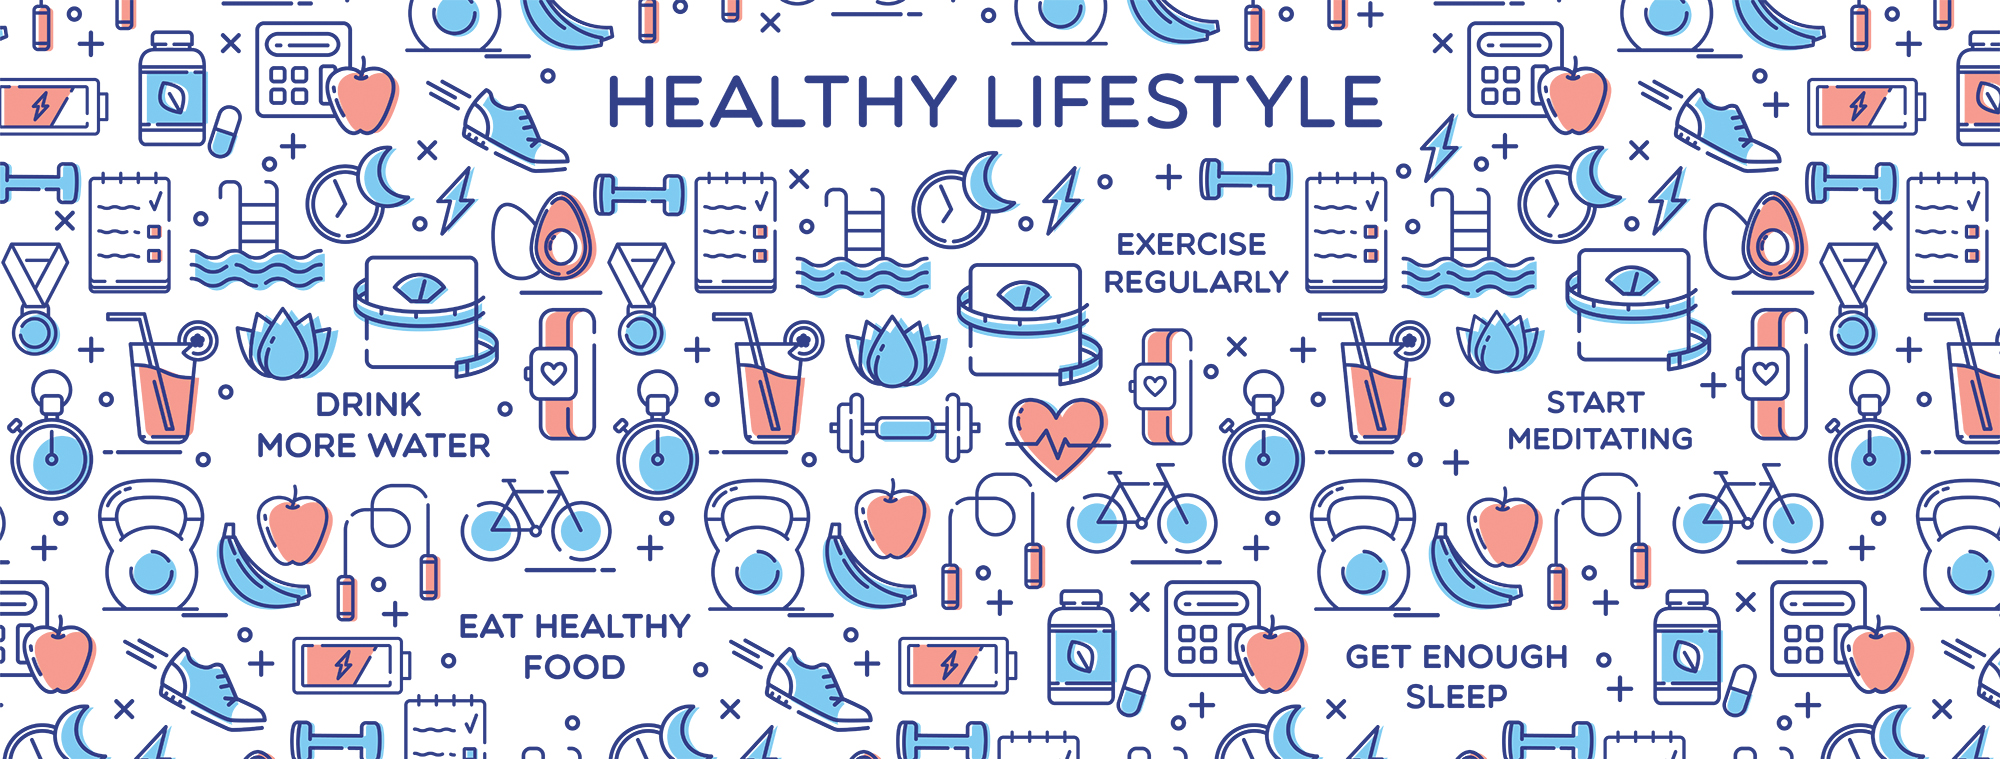 Healthy Lifestyle graphic